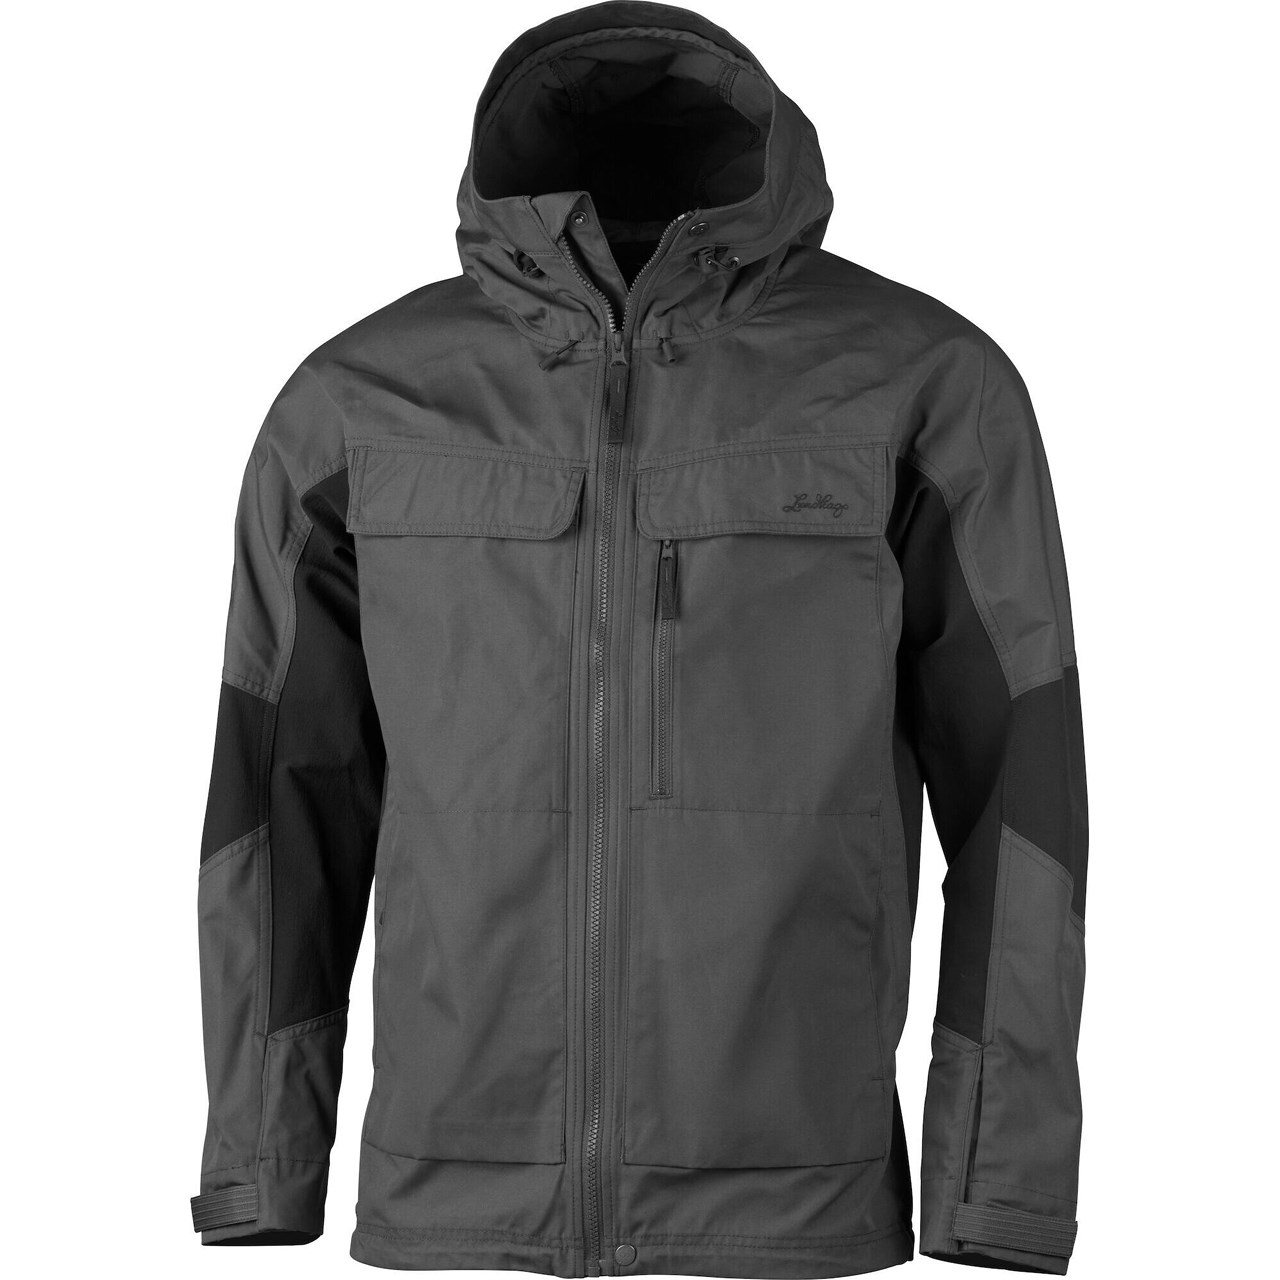 Lundhags "Authentic Ms Jacket" - charcoal